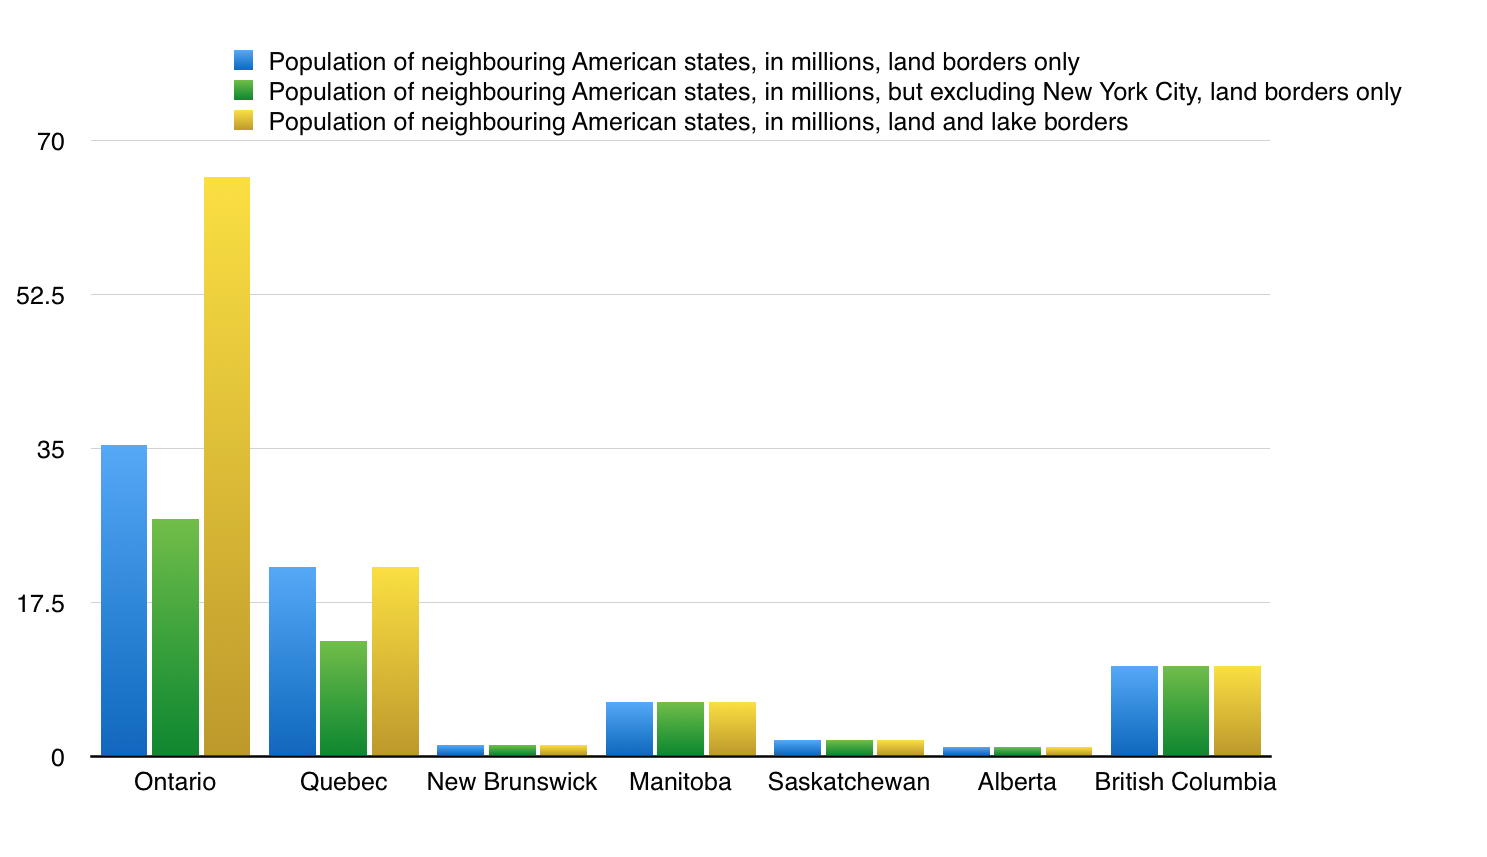 Population of Neighboring American States in Millions